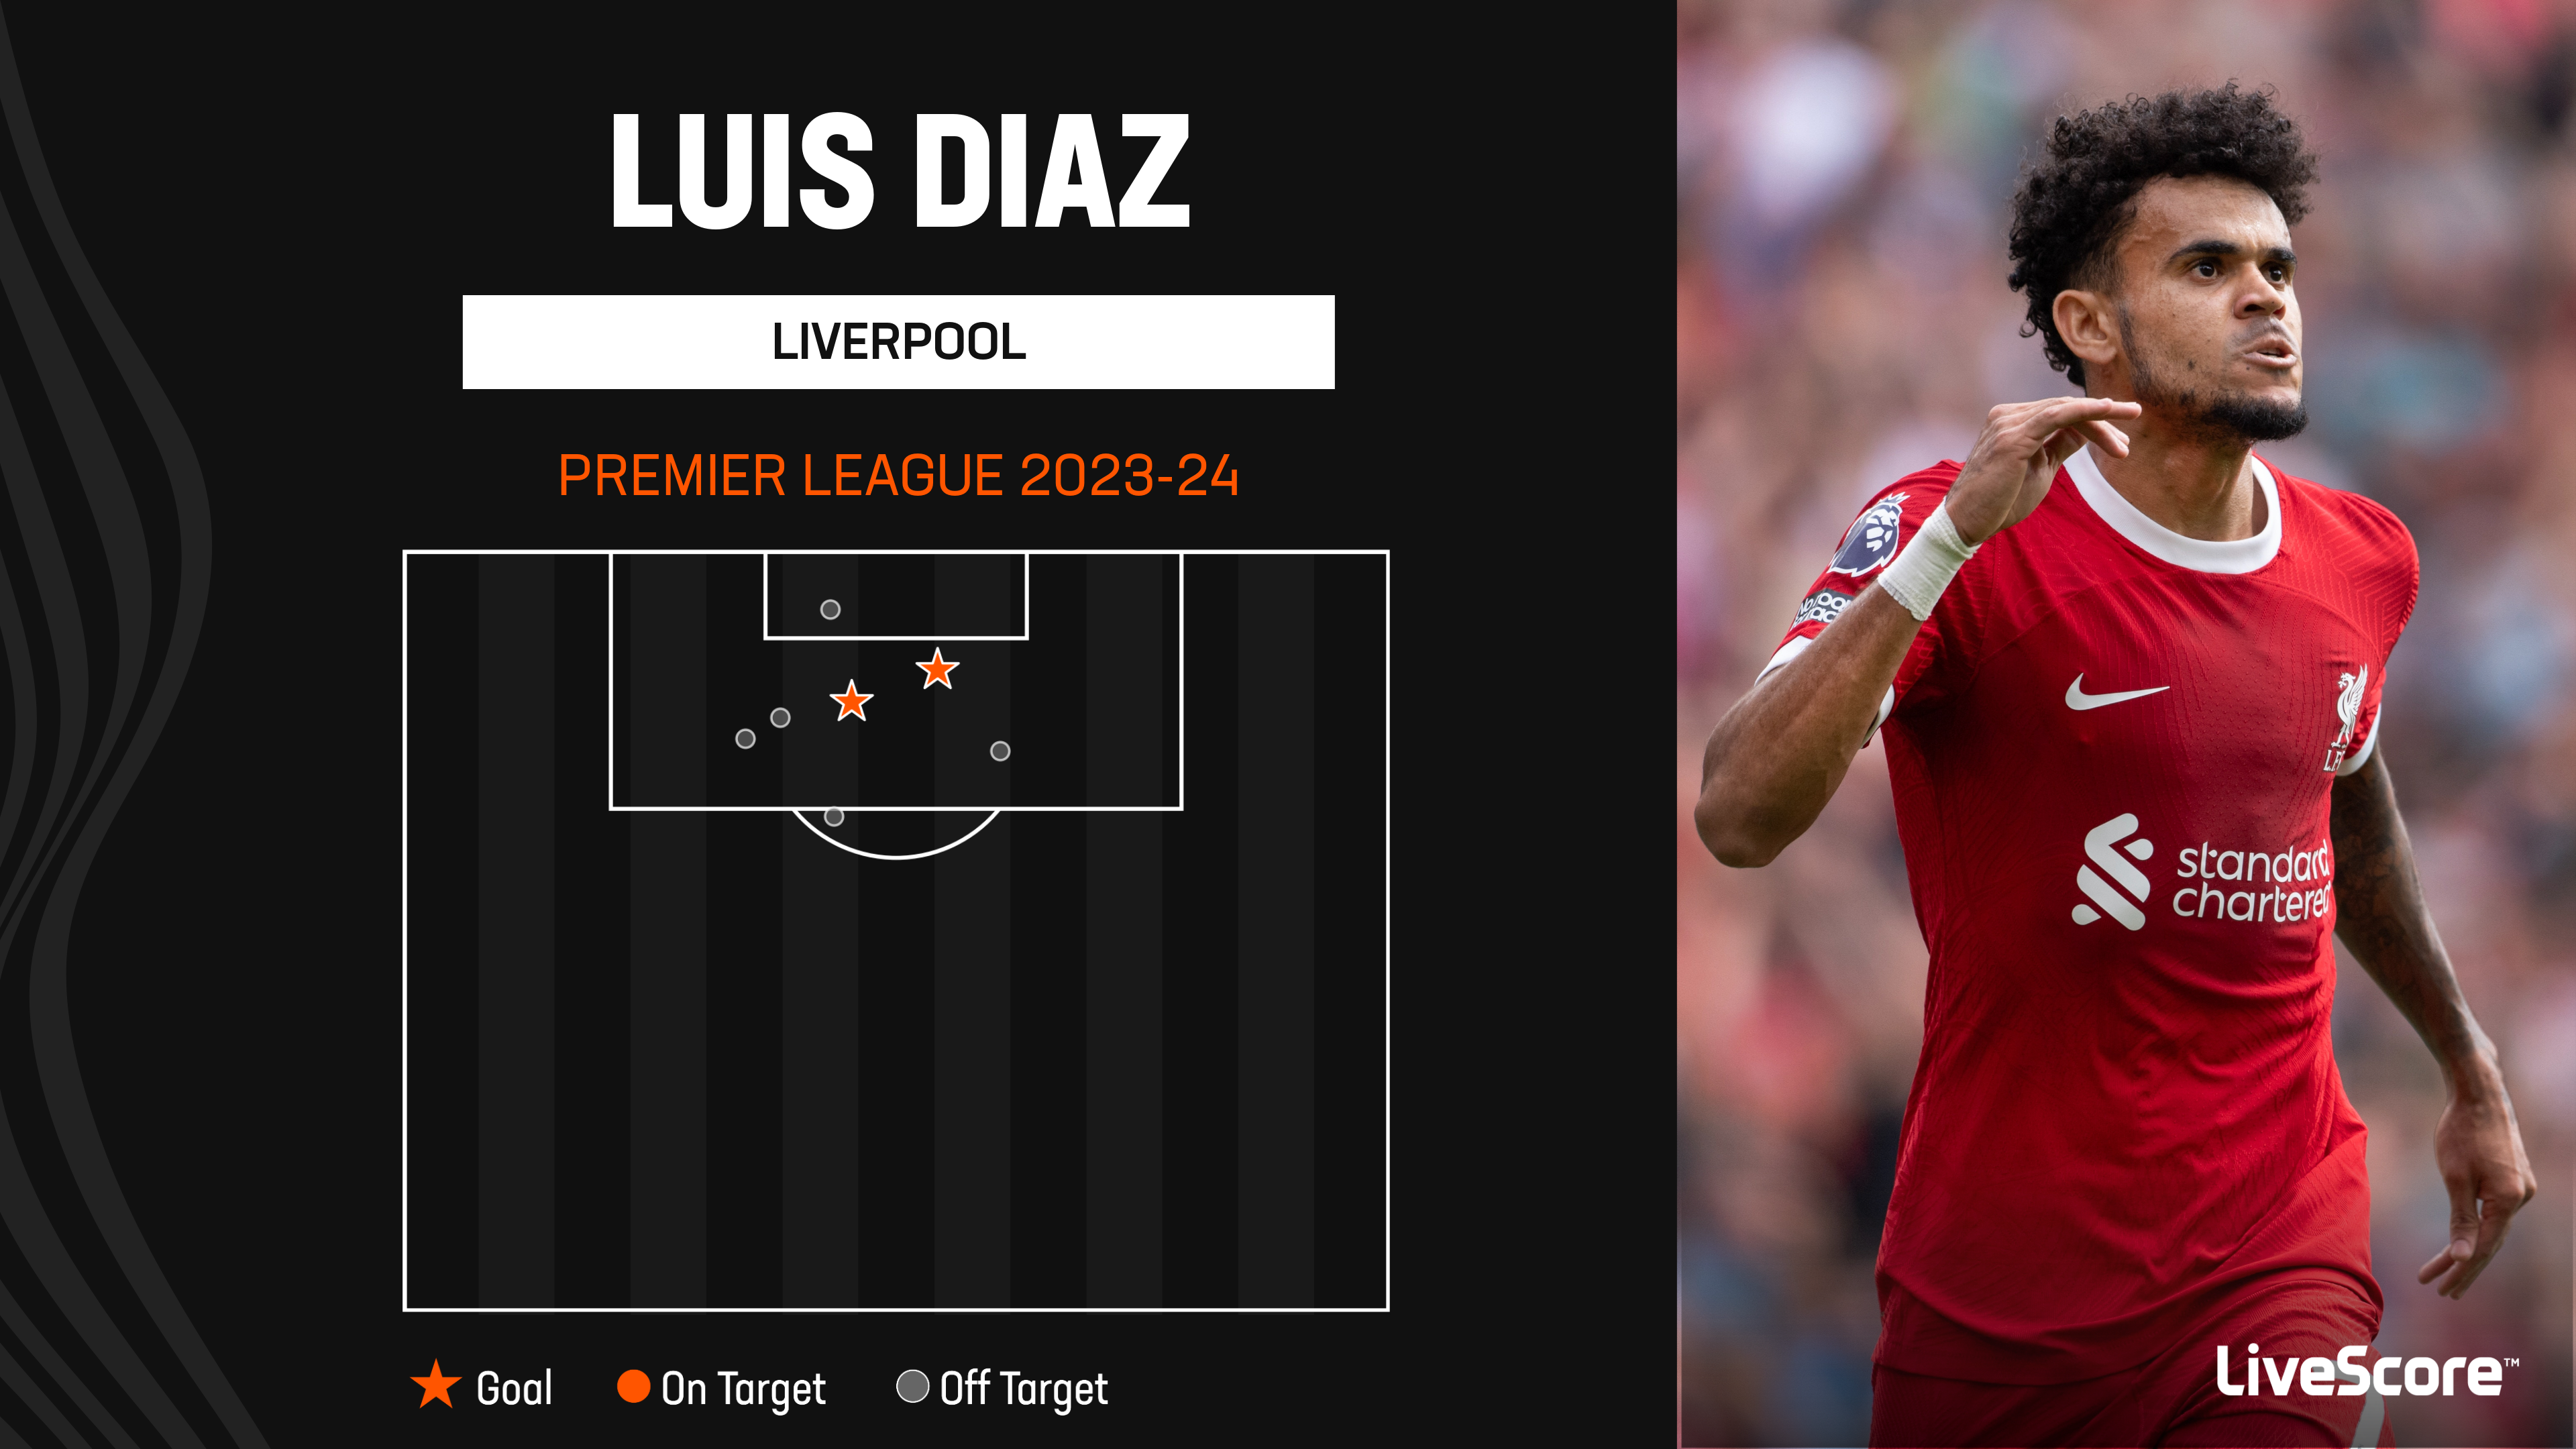 Luis Diaz, Liverpool's new No. 7, can live up to its legacy